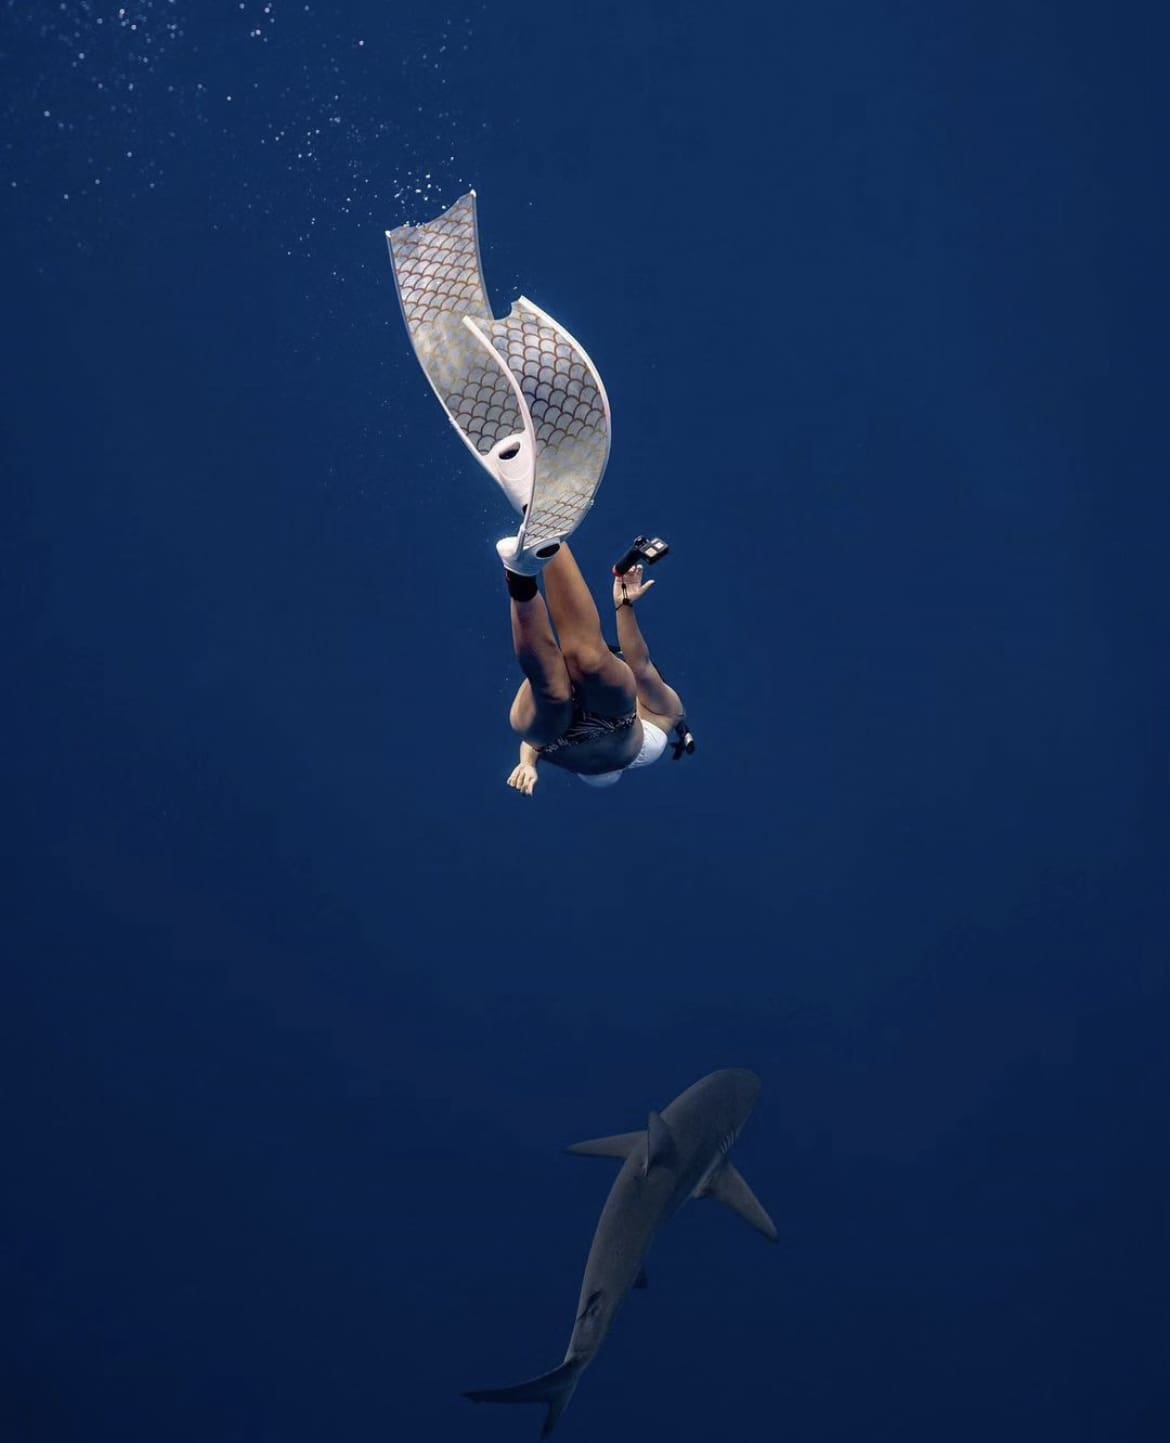 Freediving with sharks on Hawaii's North Shore